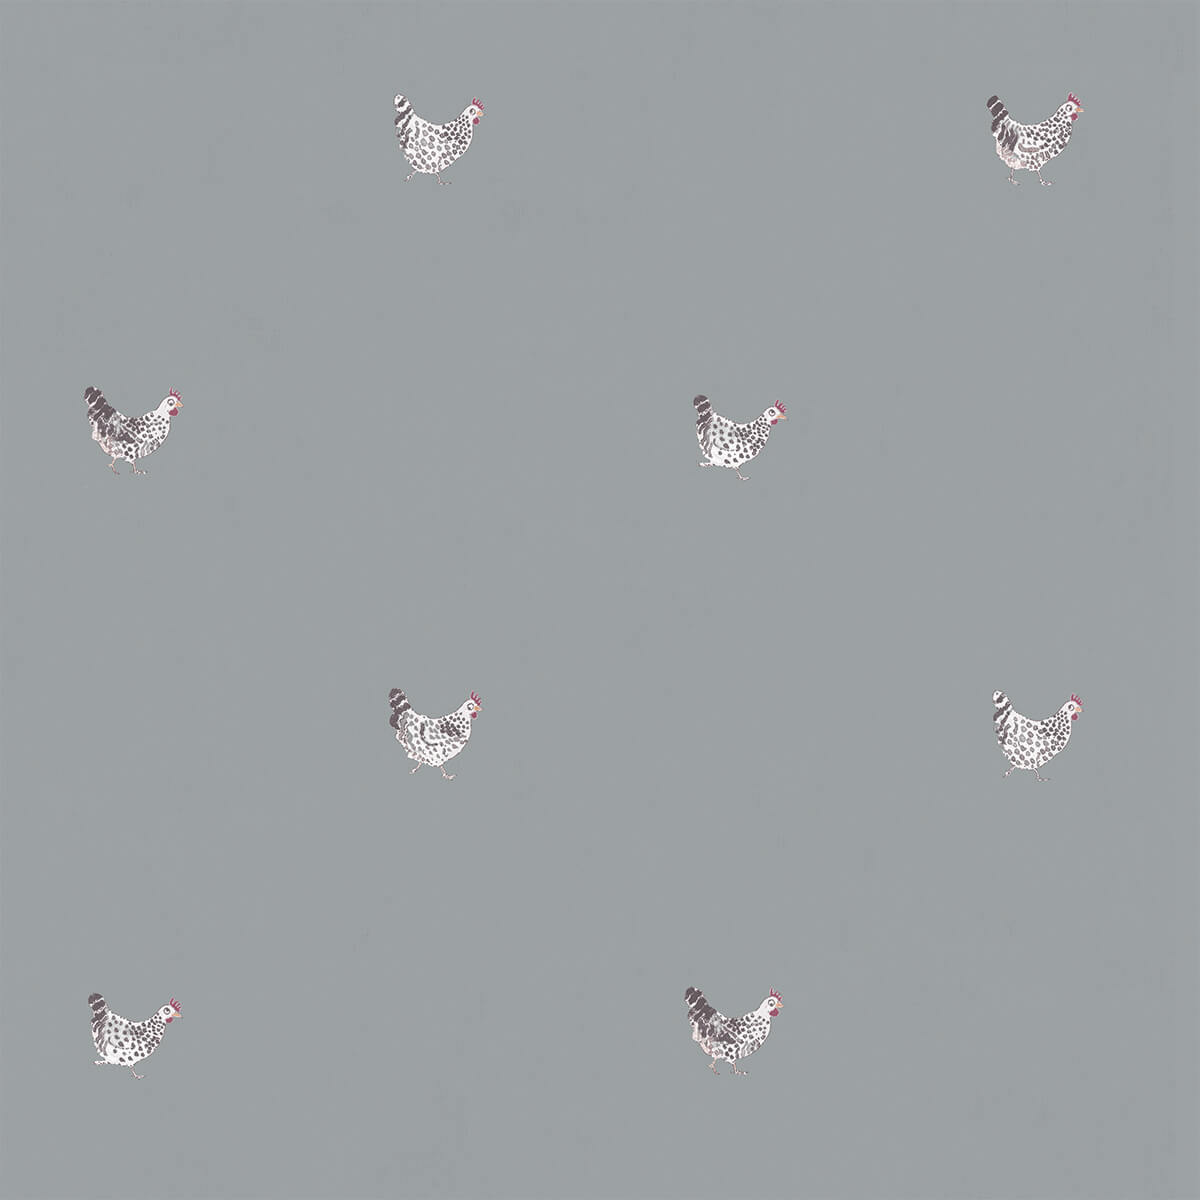 Chicken Pale Sage Blue Made to Measure Roman Blind by Sophie Allport